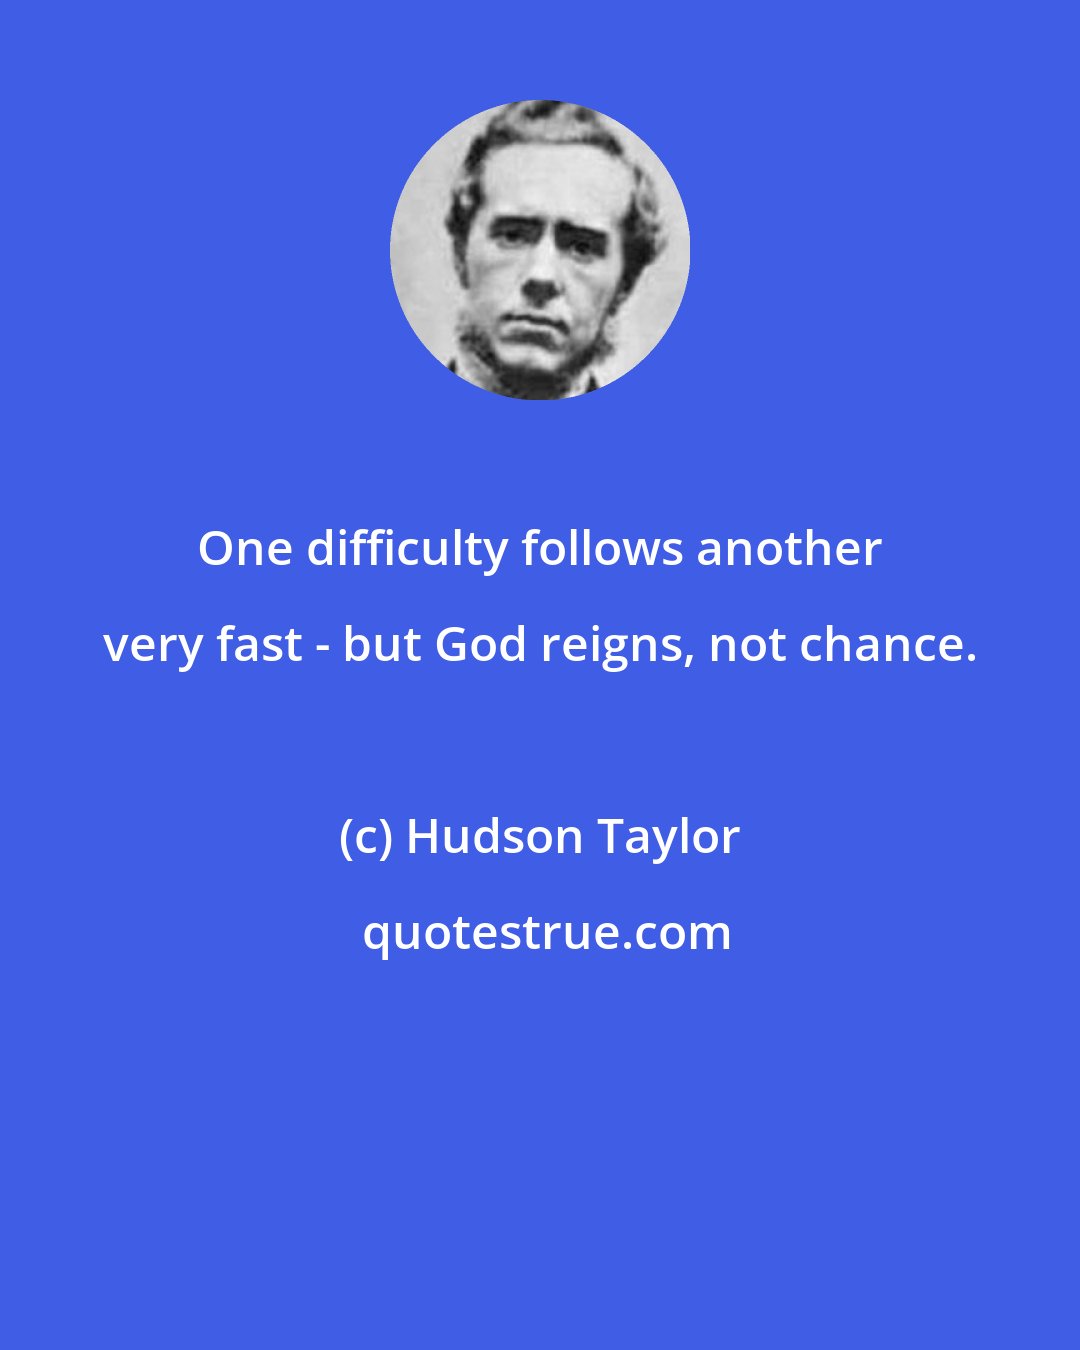 Hudson Taylor: One difficulty follows another very fast - but God reigns, not chance.